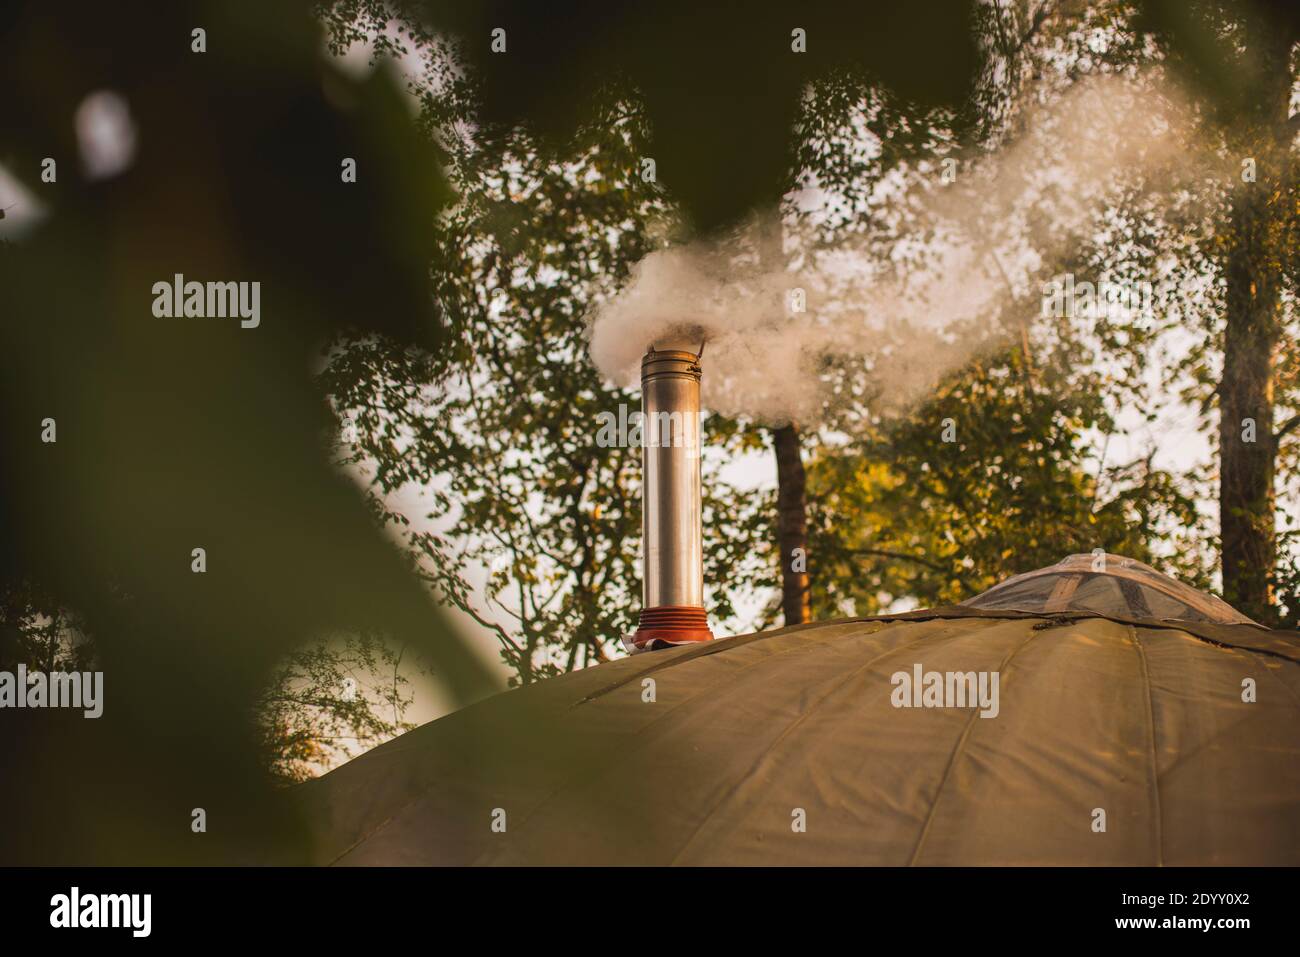 A smoking chimney from a wood burning stove installed in a yurt at a glamp site camping site. Stock Photo